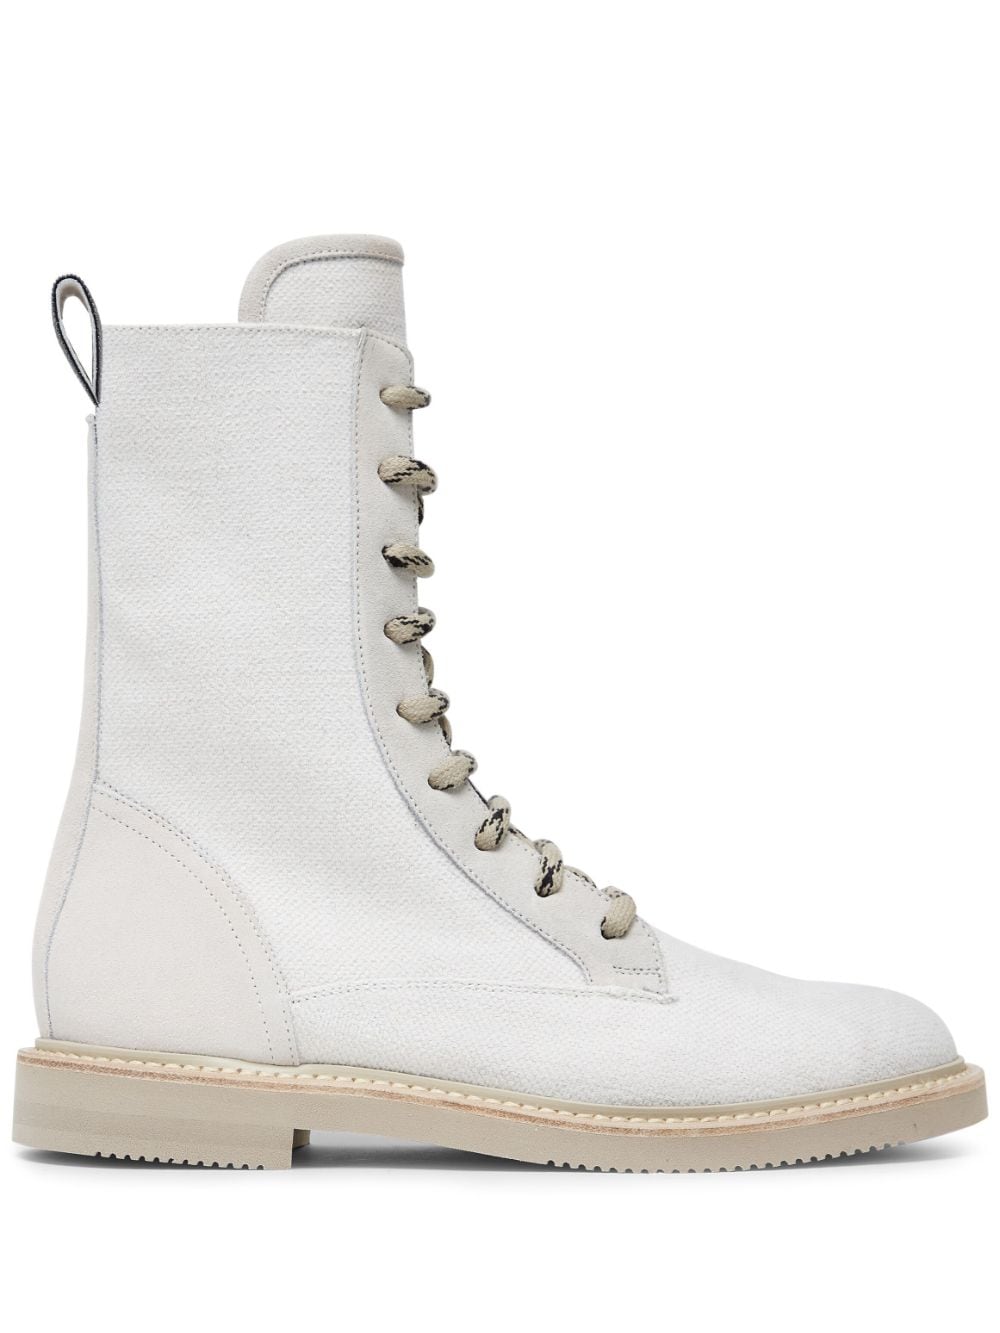 Brunello Cucinelli White Canvas Boots With Shiny Details For Women